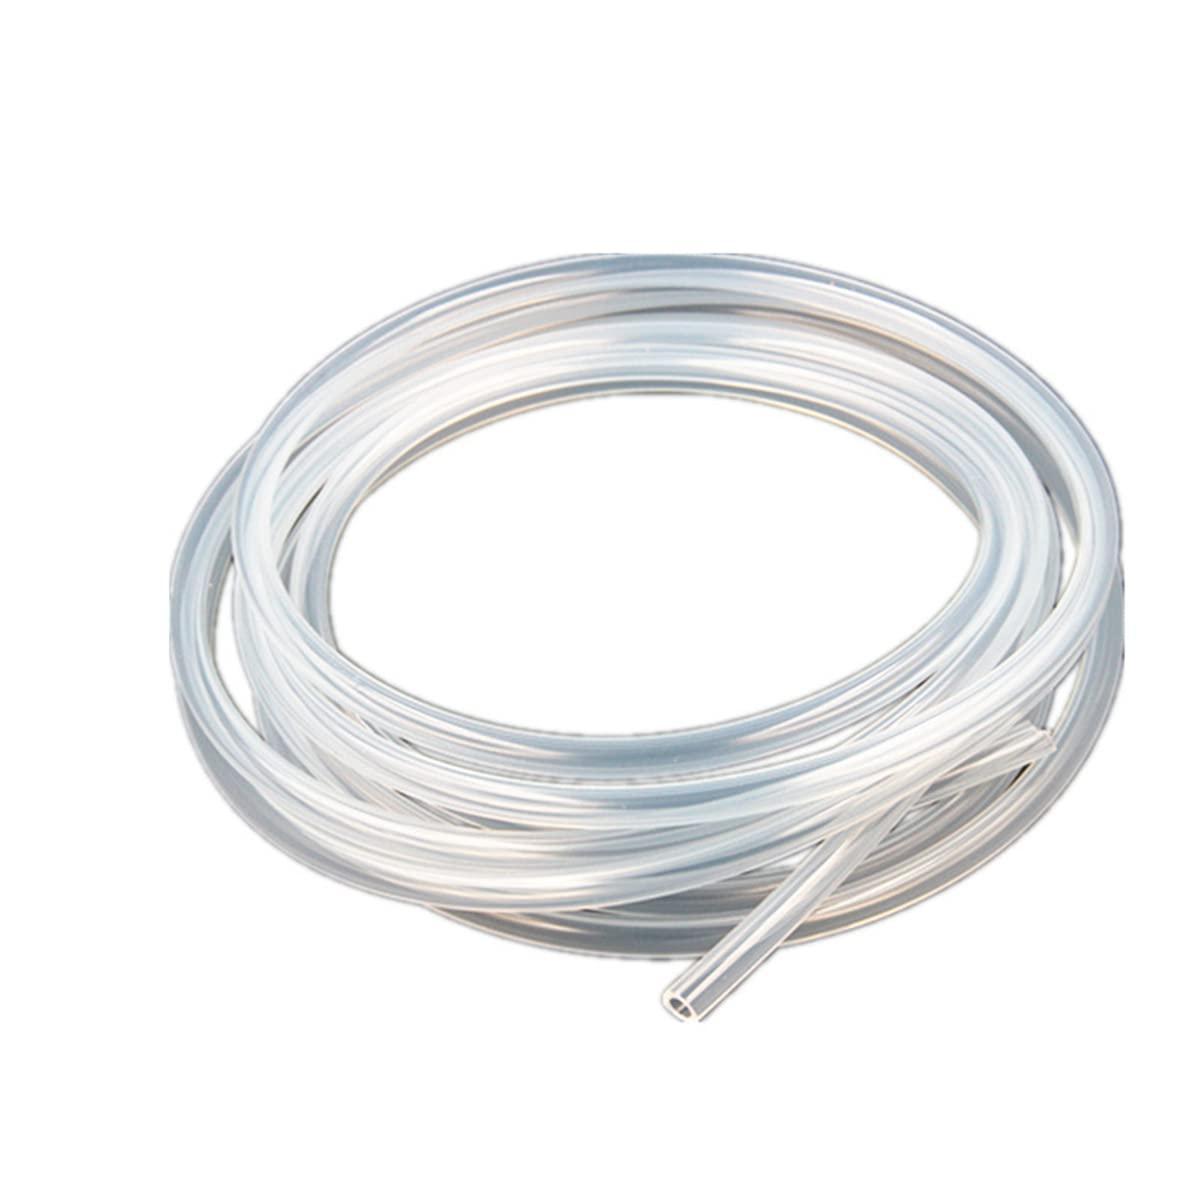 MACHSWON Silicone Tube 7.9mm ID 11.1mm OD 100.04ft Transparent Silicone Rubber Tube Silicone Tube Food Grade Air Hose for Pump Transfer 30.5m